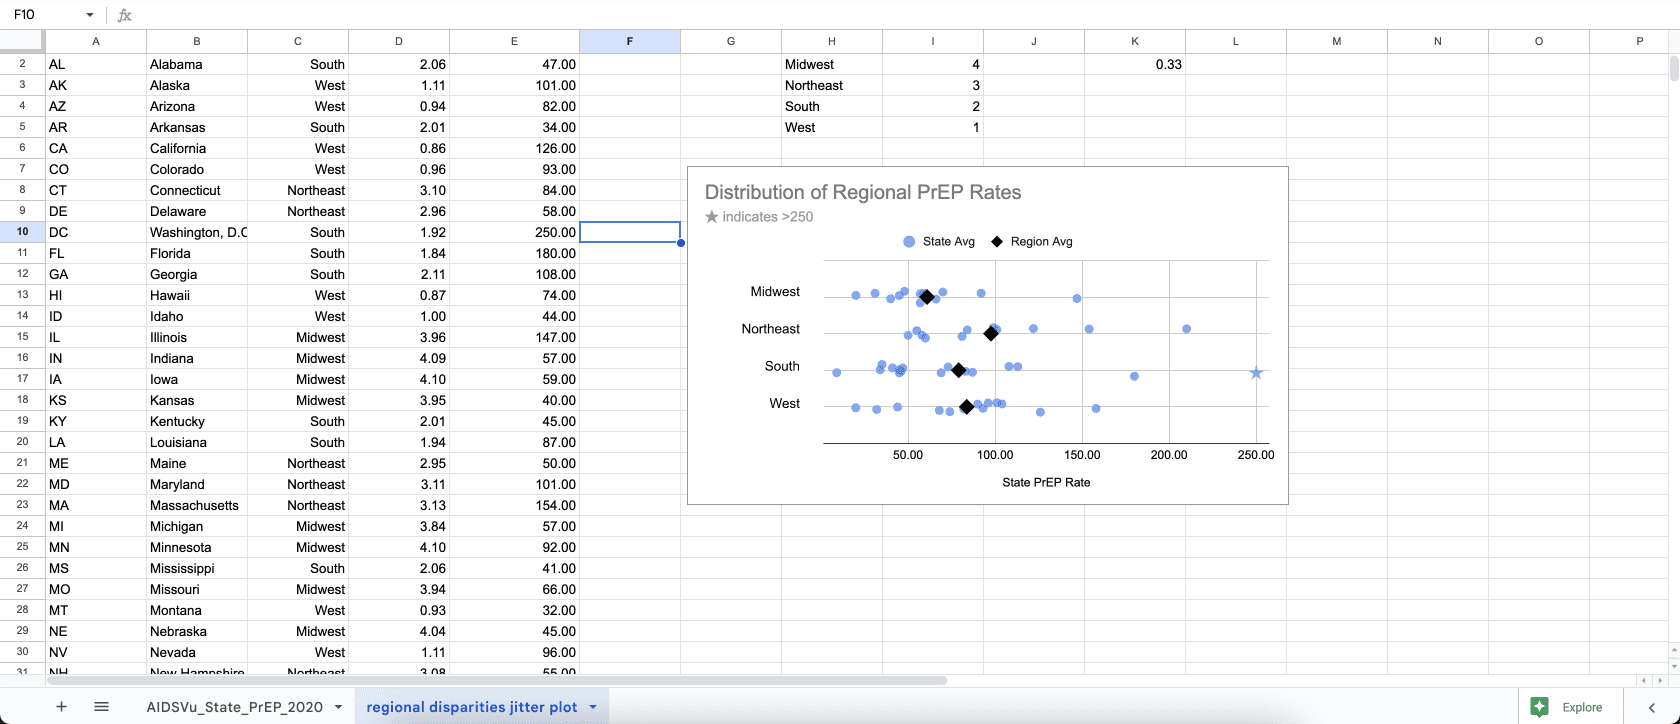 Screenshot of a jitter plot created in Google sheets, showing regional differences in PrEP coverage